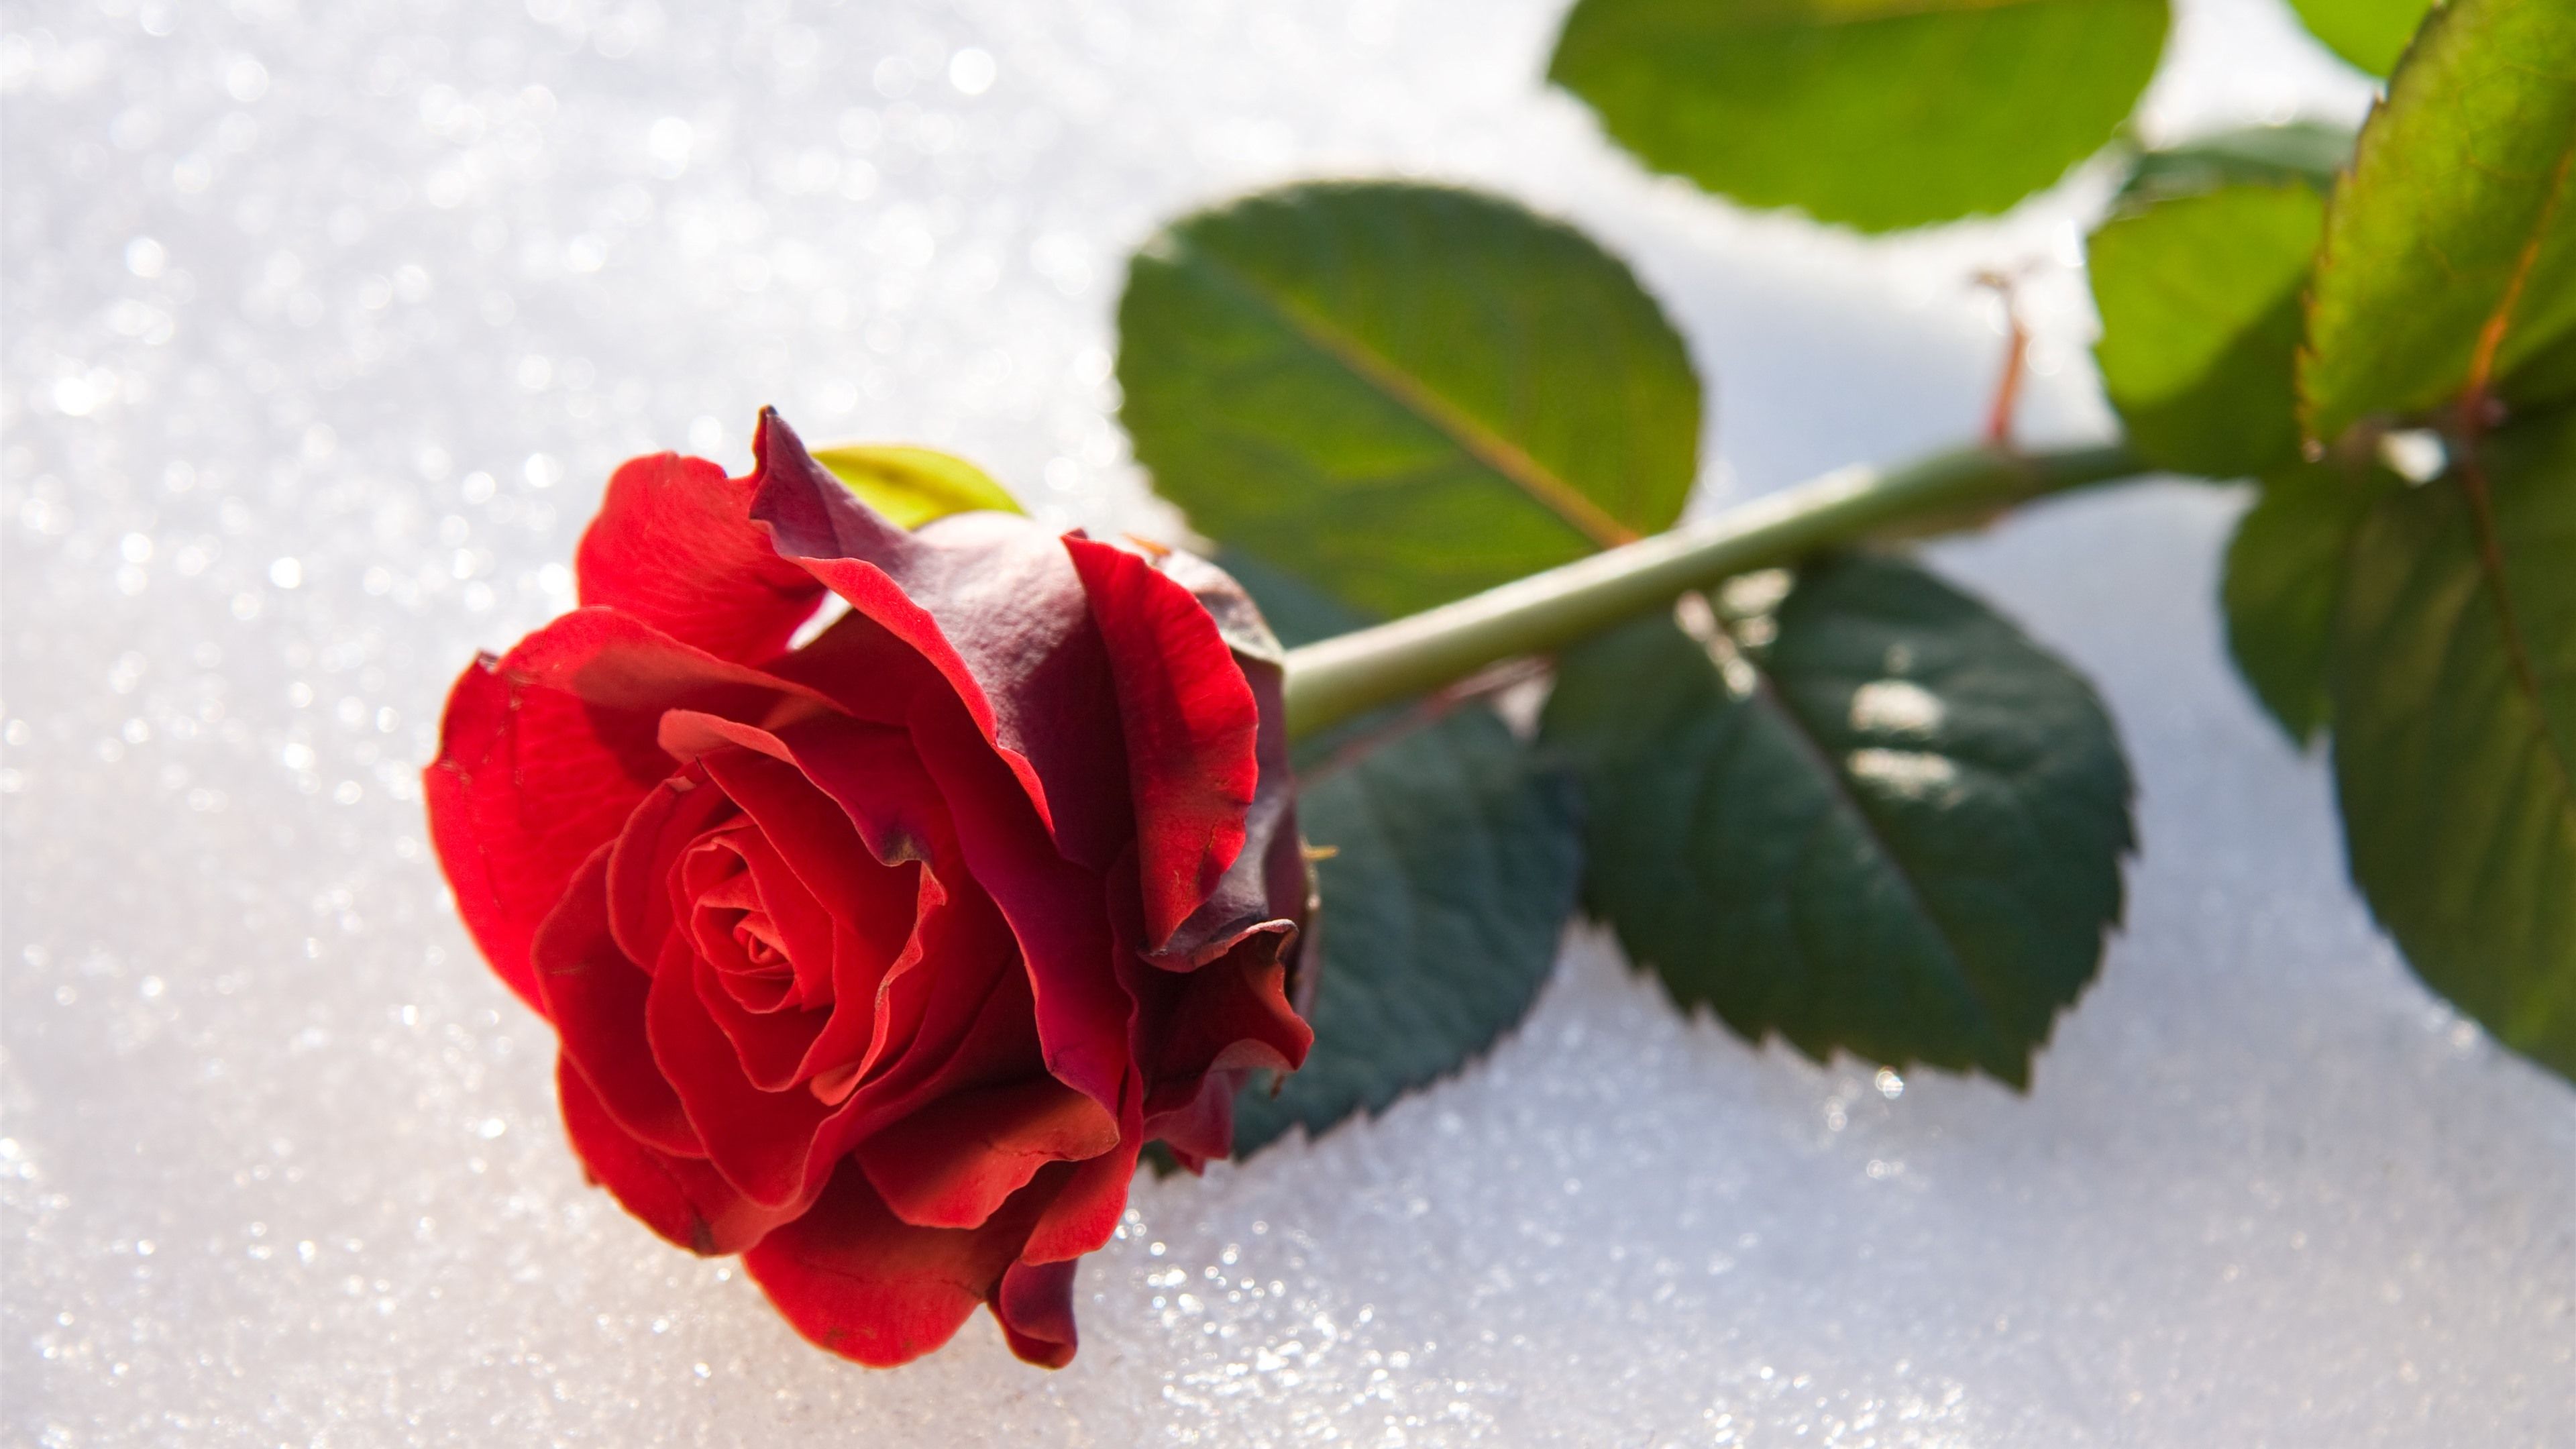 Wallpapers Red rose, petals, stem, leaves 7680x4320 UHD 8K Picture, Image